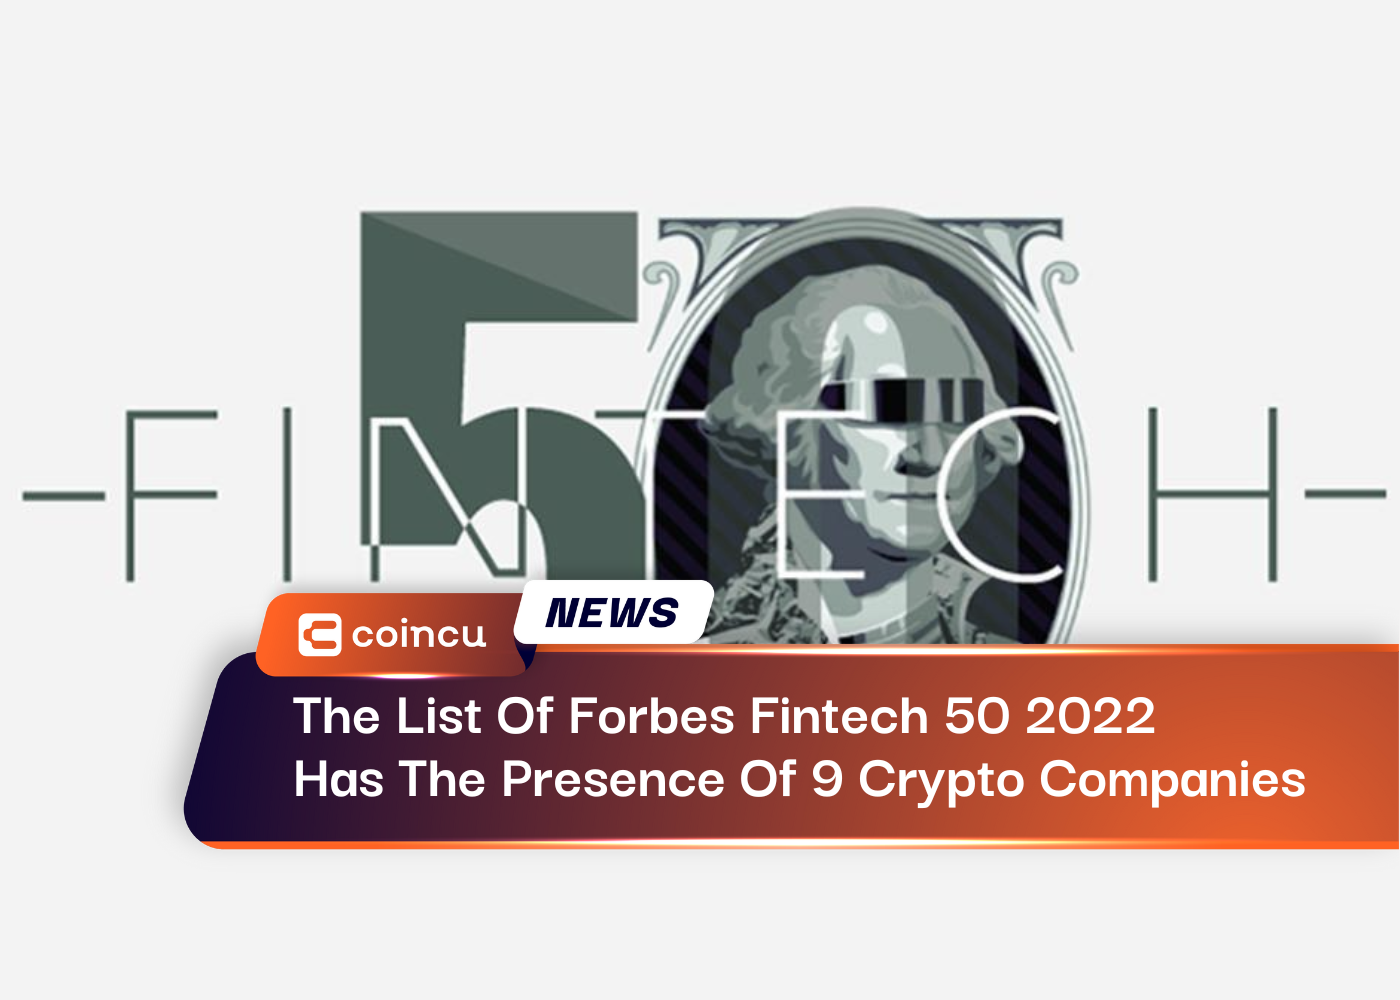 The List Of Forbes Fintech 50 2022 Has The Presence Of 9 Crypto Companies